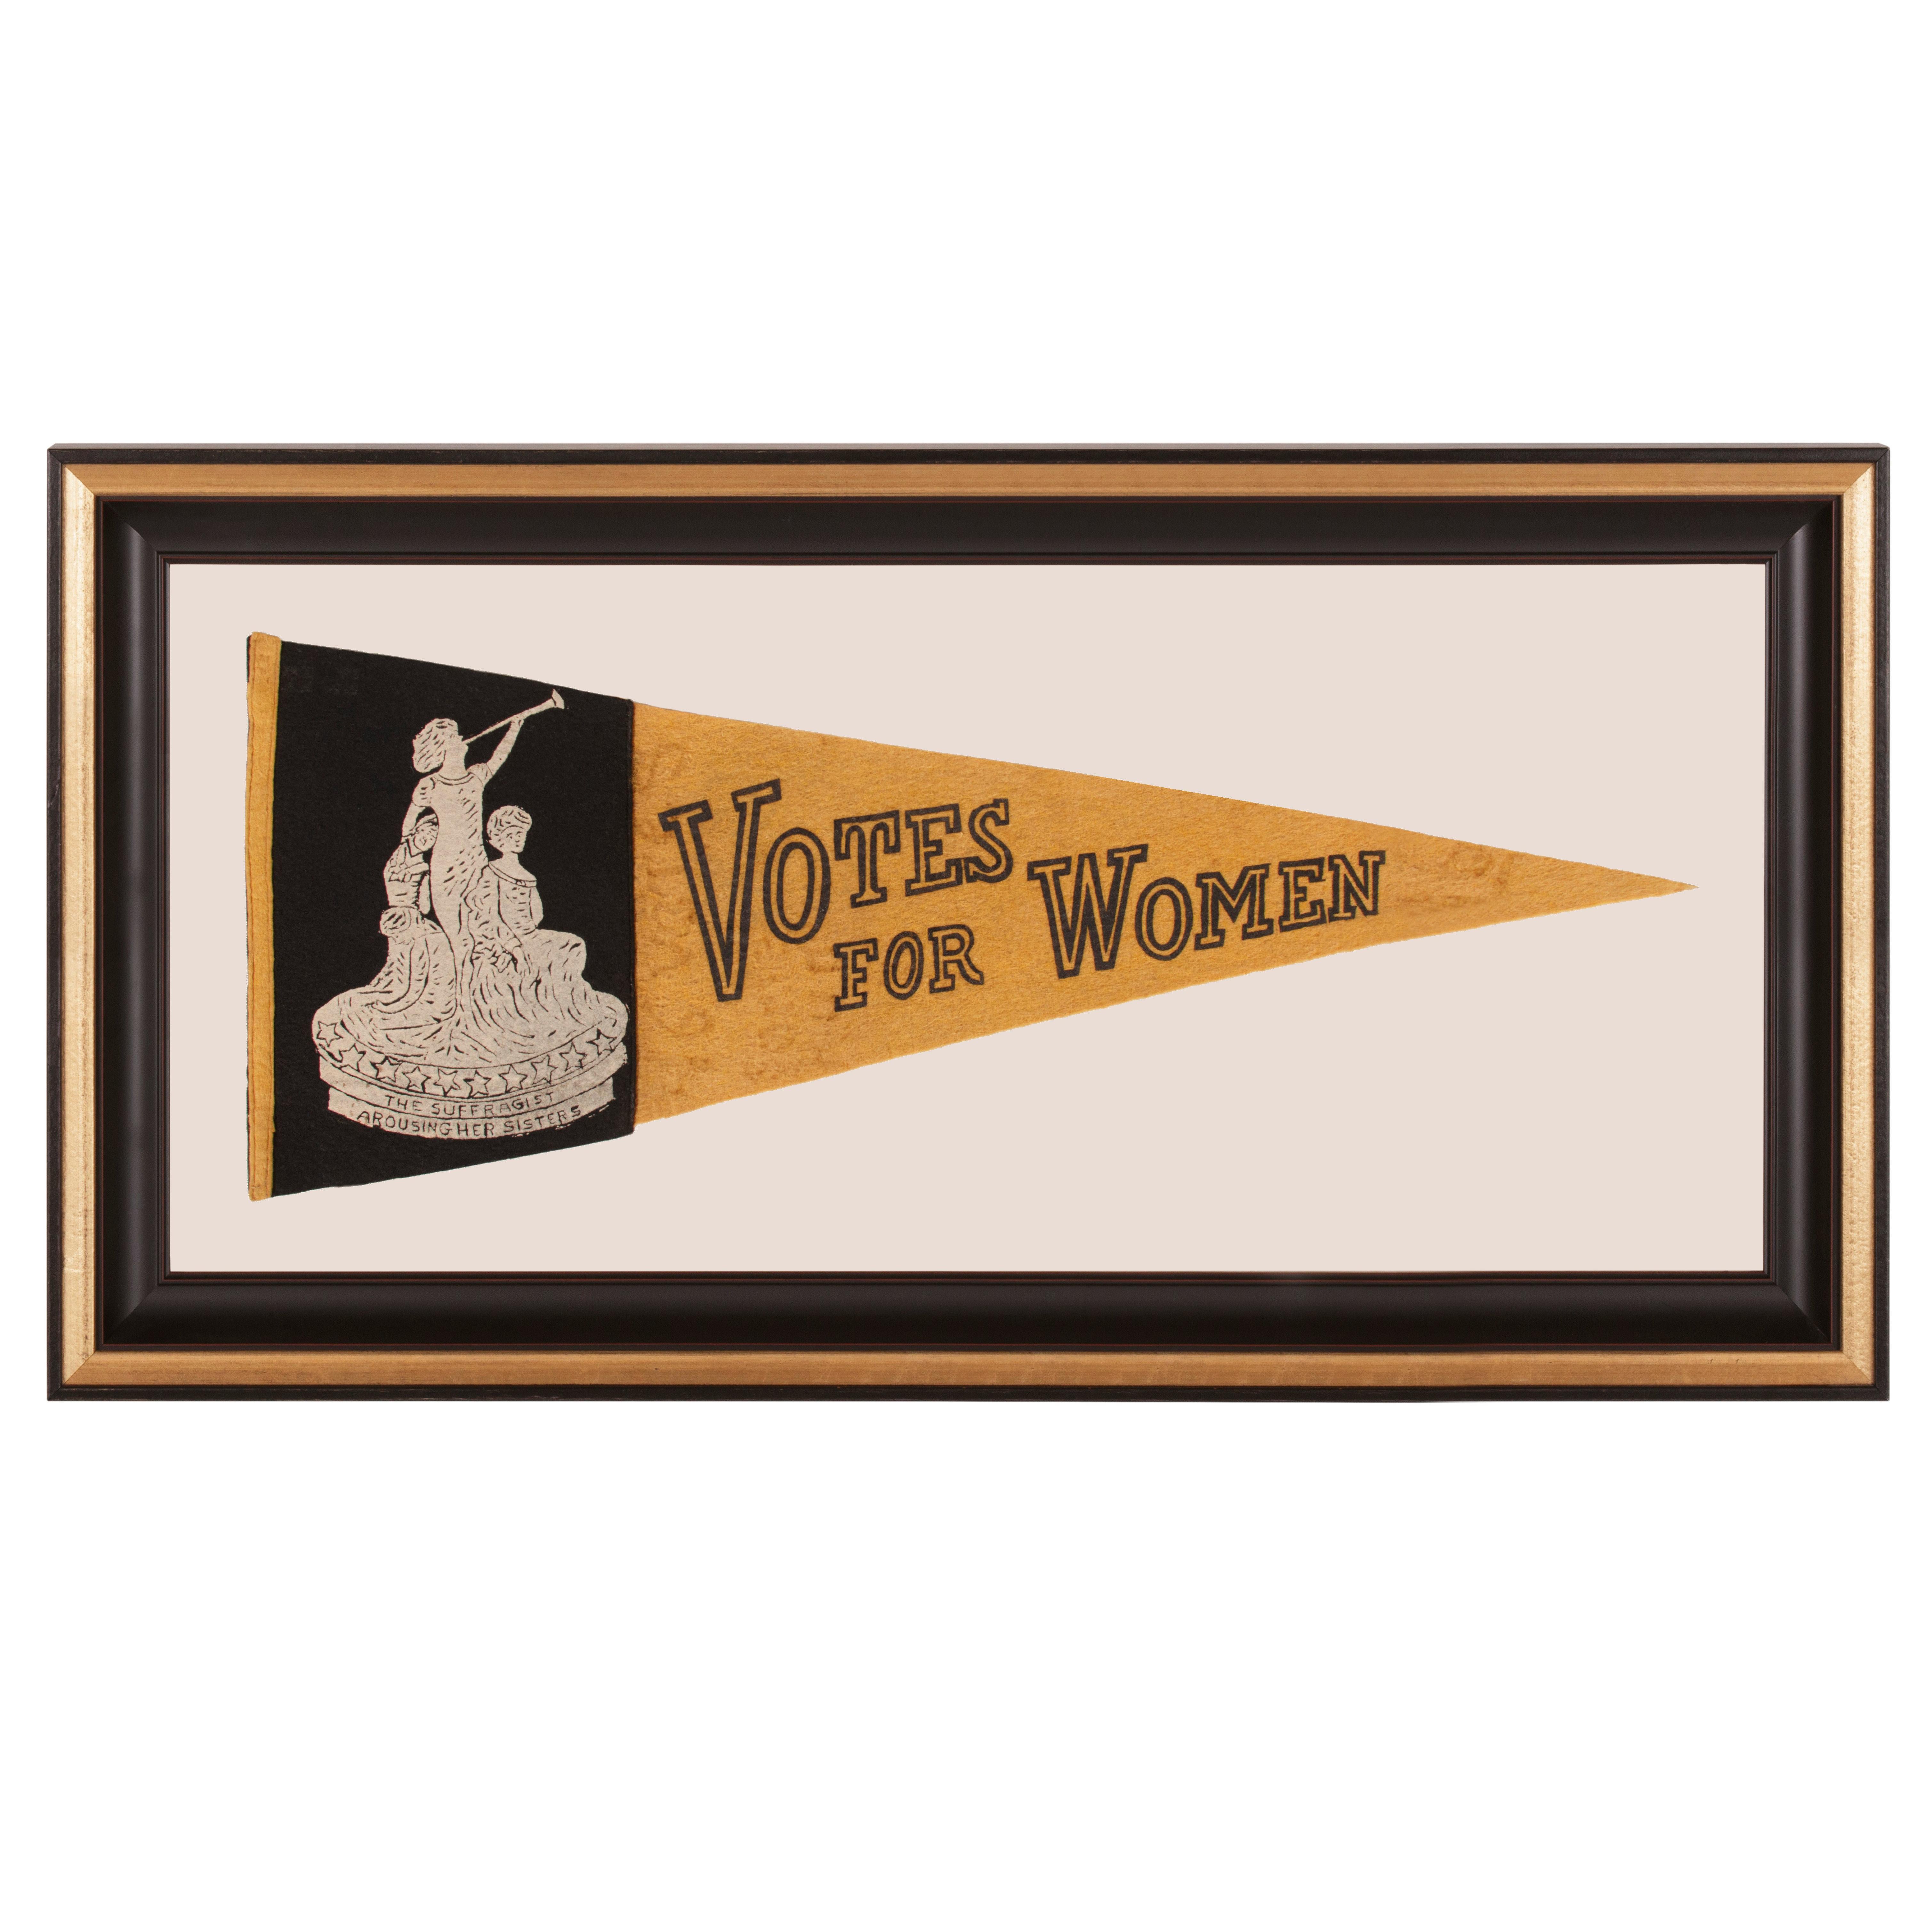 Rare "Votes For Women" Pennant with and Image of a 1911 Statuette  "Suffragist"